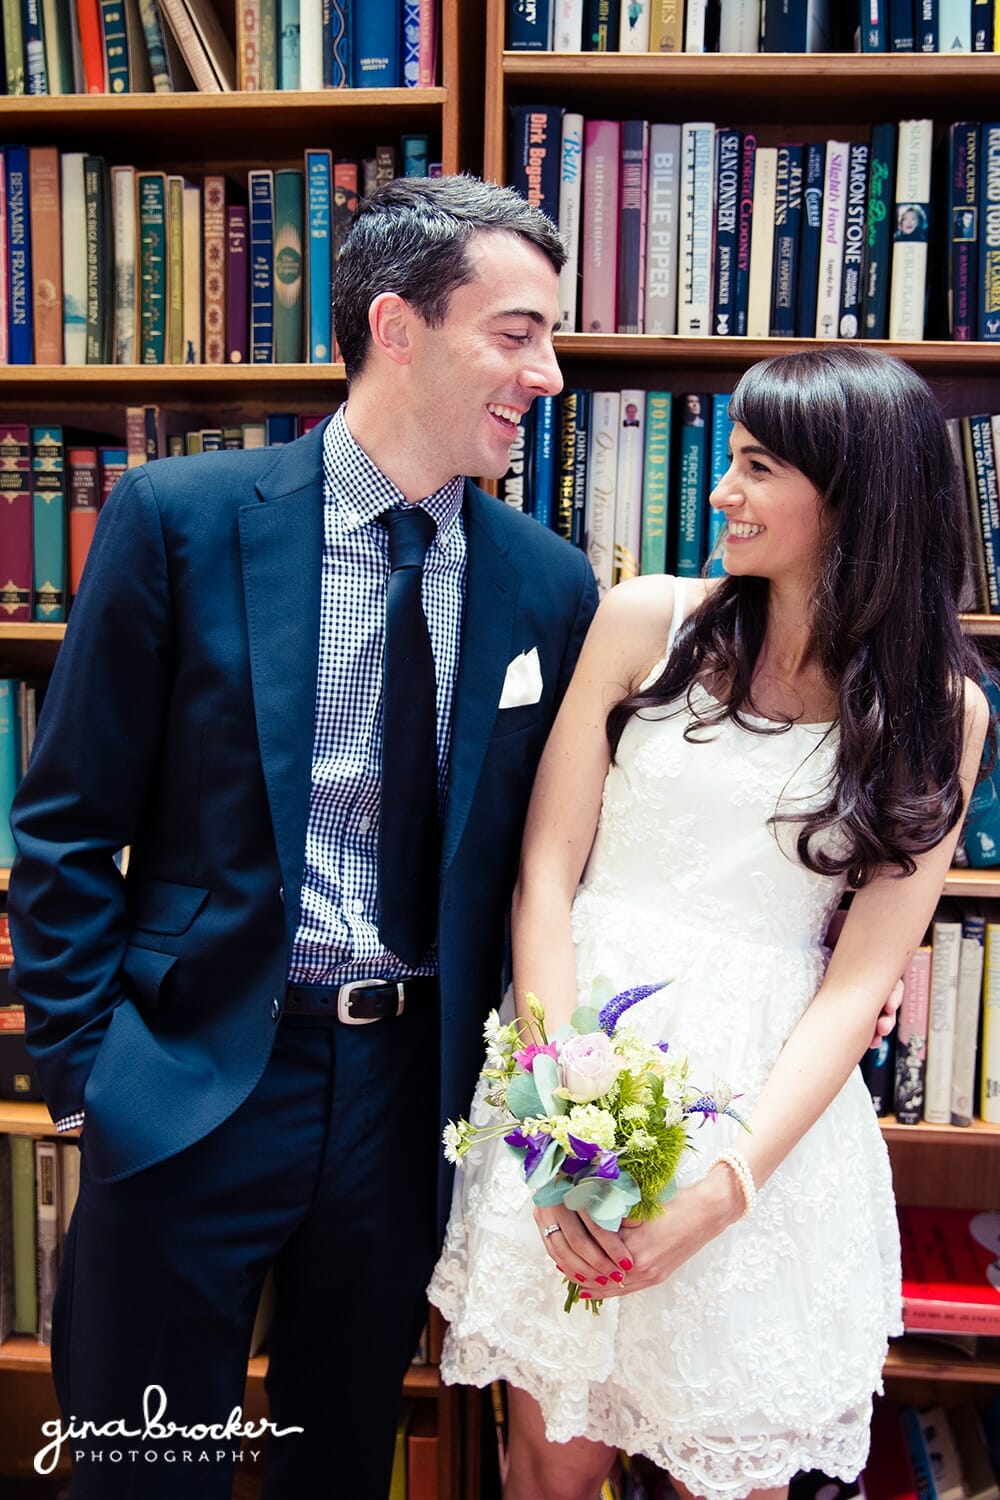 Bride and Groom portraits in book shop